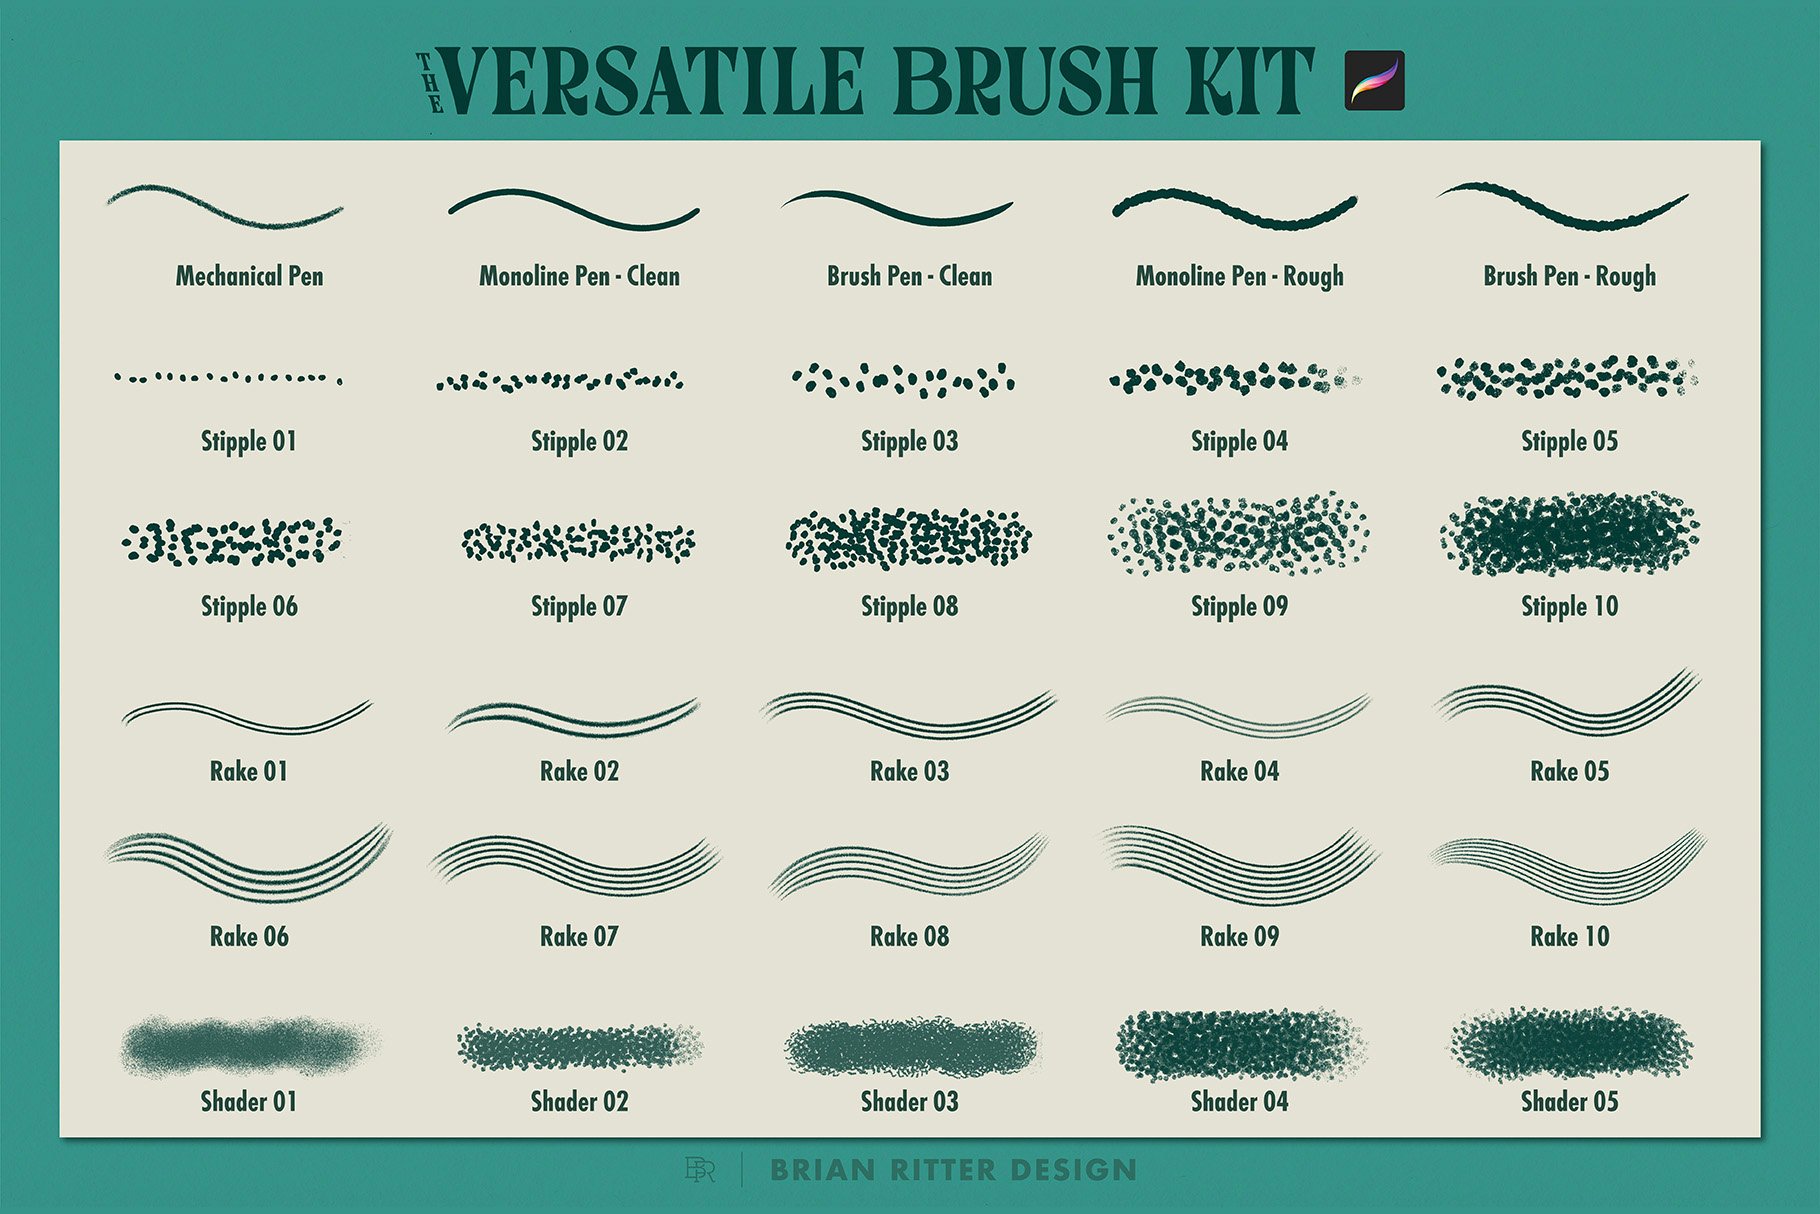 Versatility brushes collection.